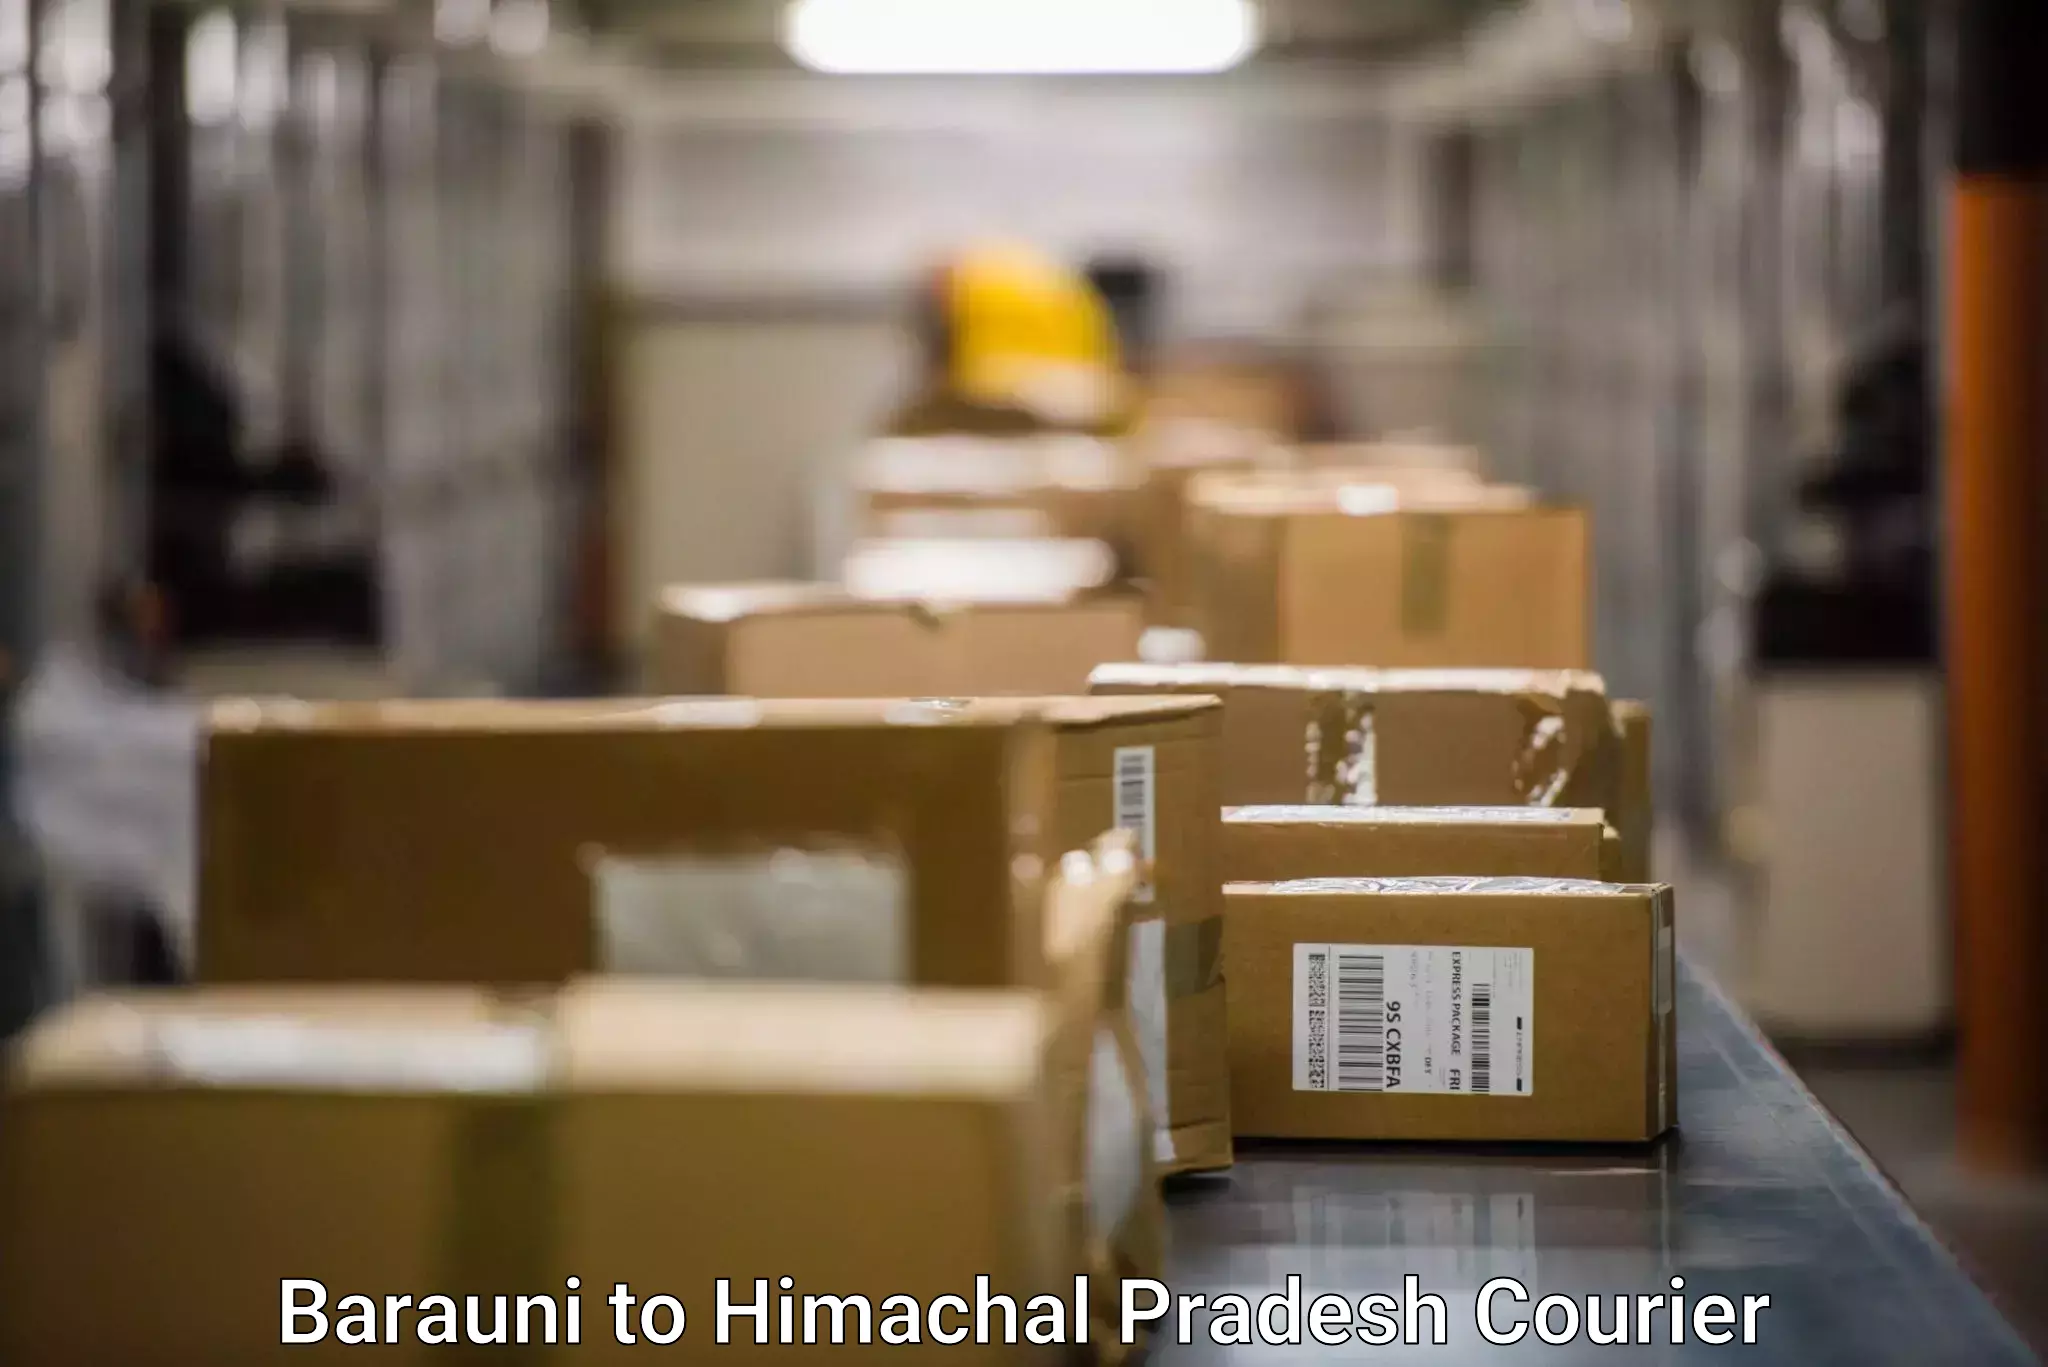 Efficient order fulfillment Barauni to YS Parmar University of Horticulture and Forestry Solan